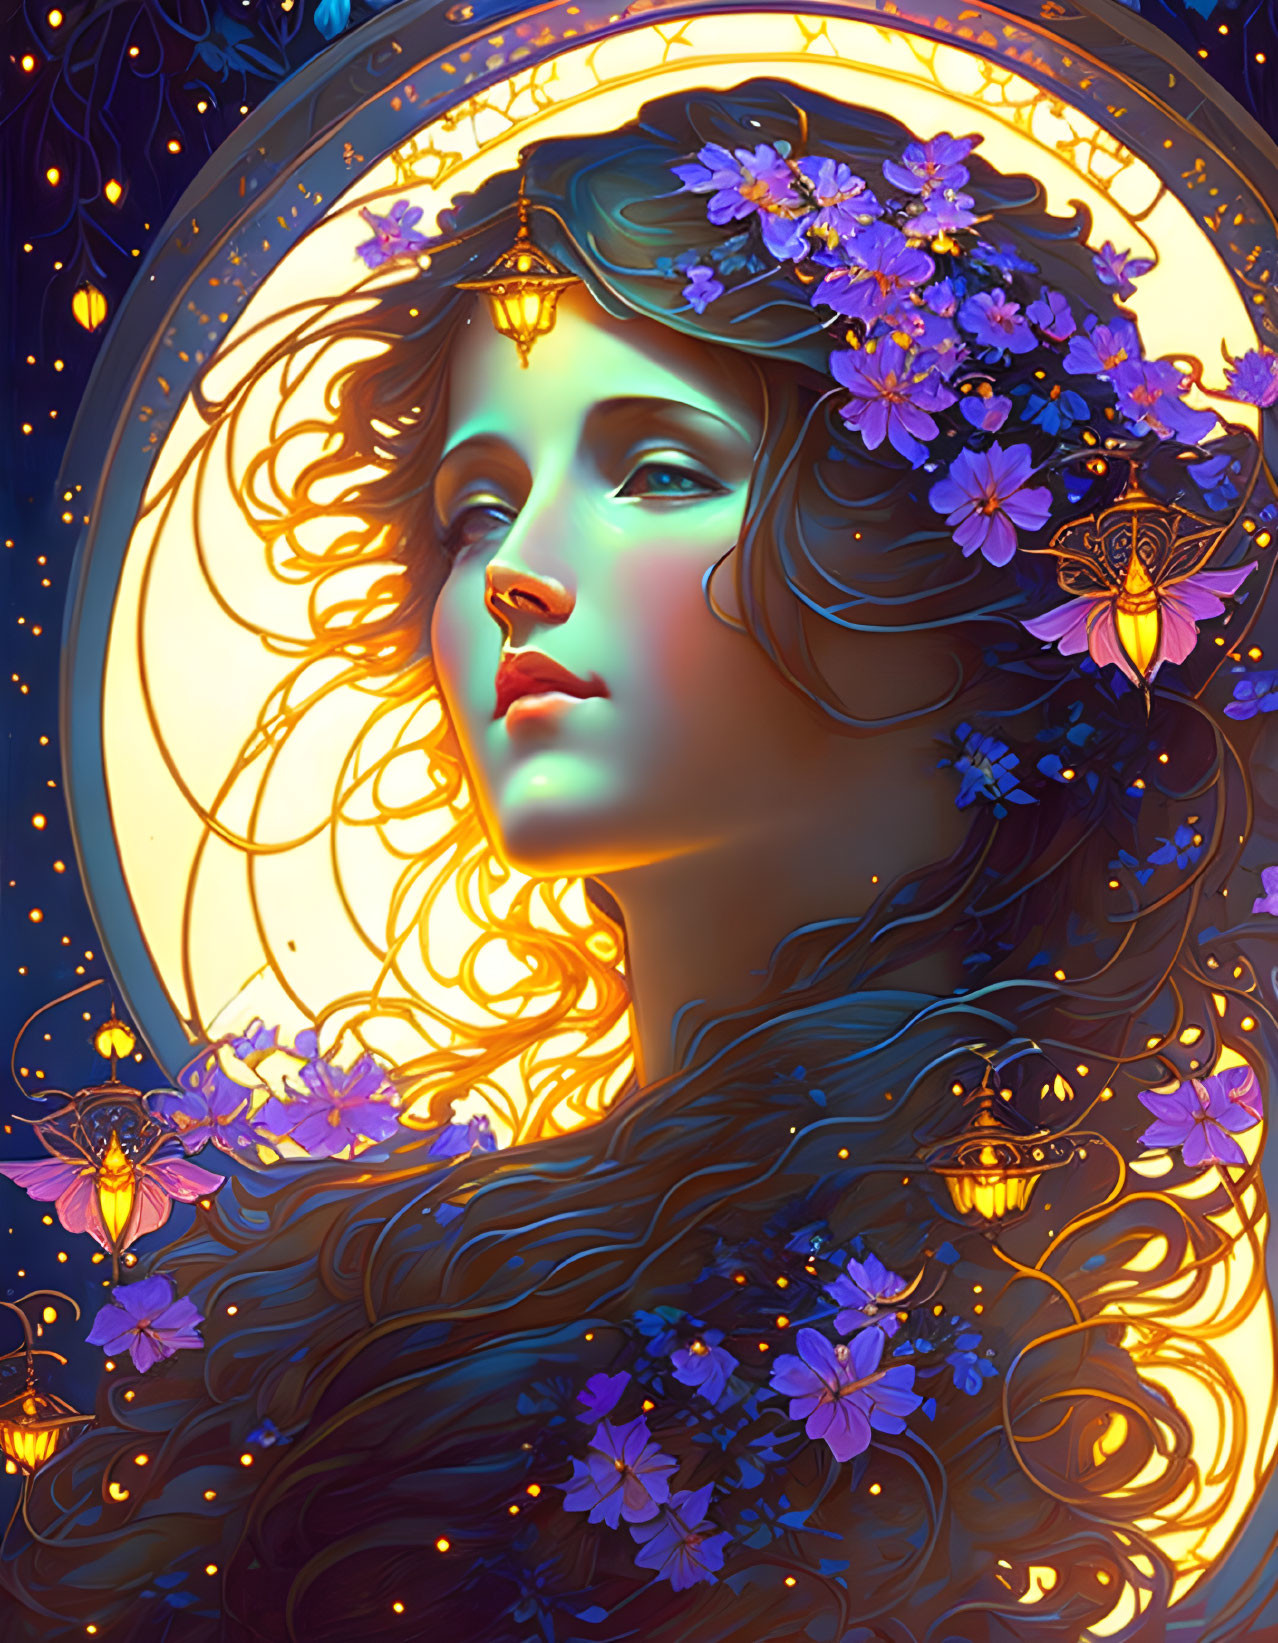 Woman with flowing hair, flowers, and butterflies under a glowing moon.